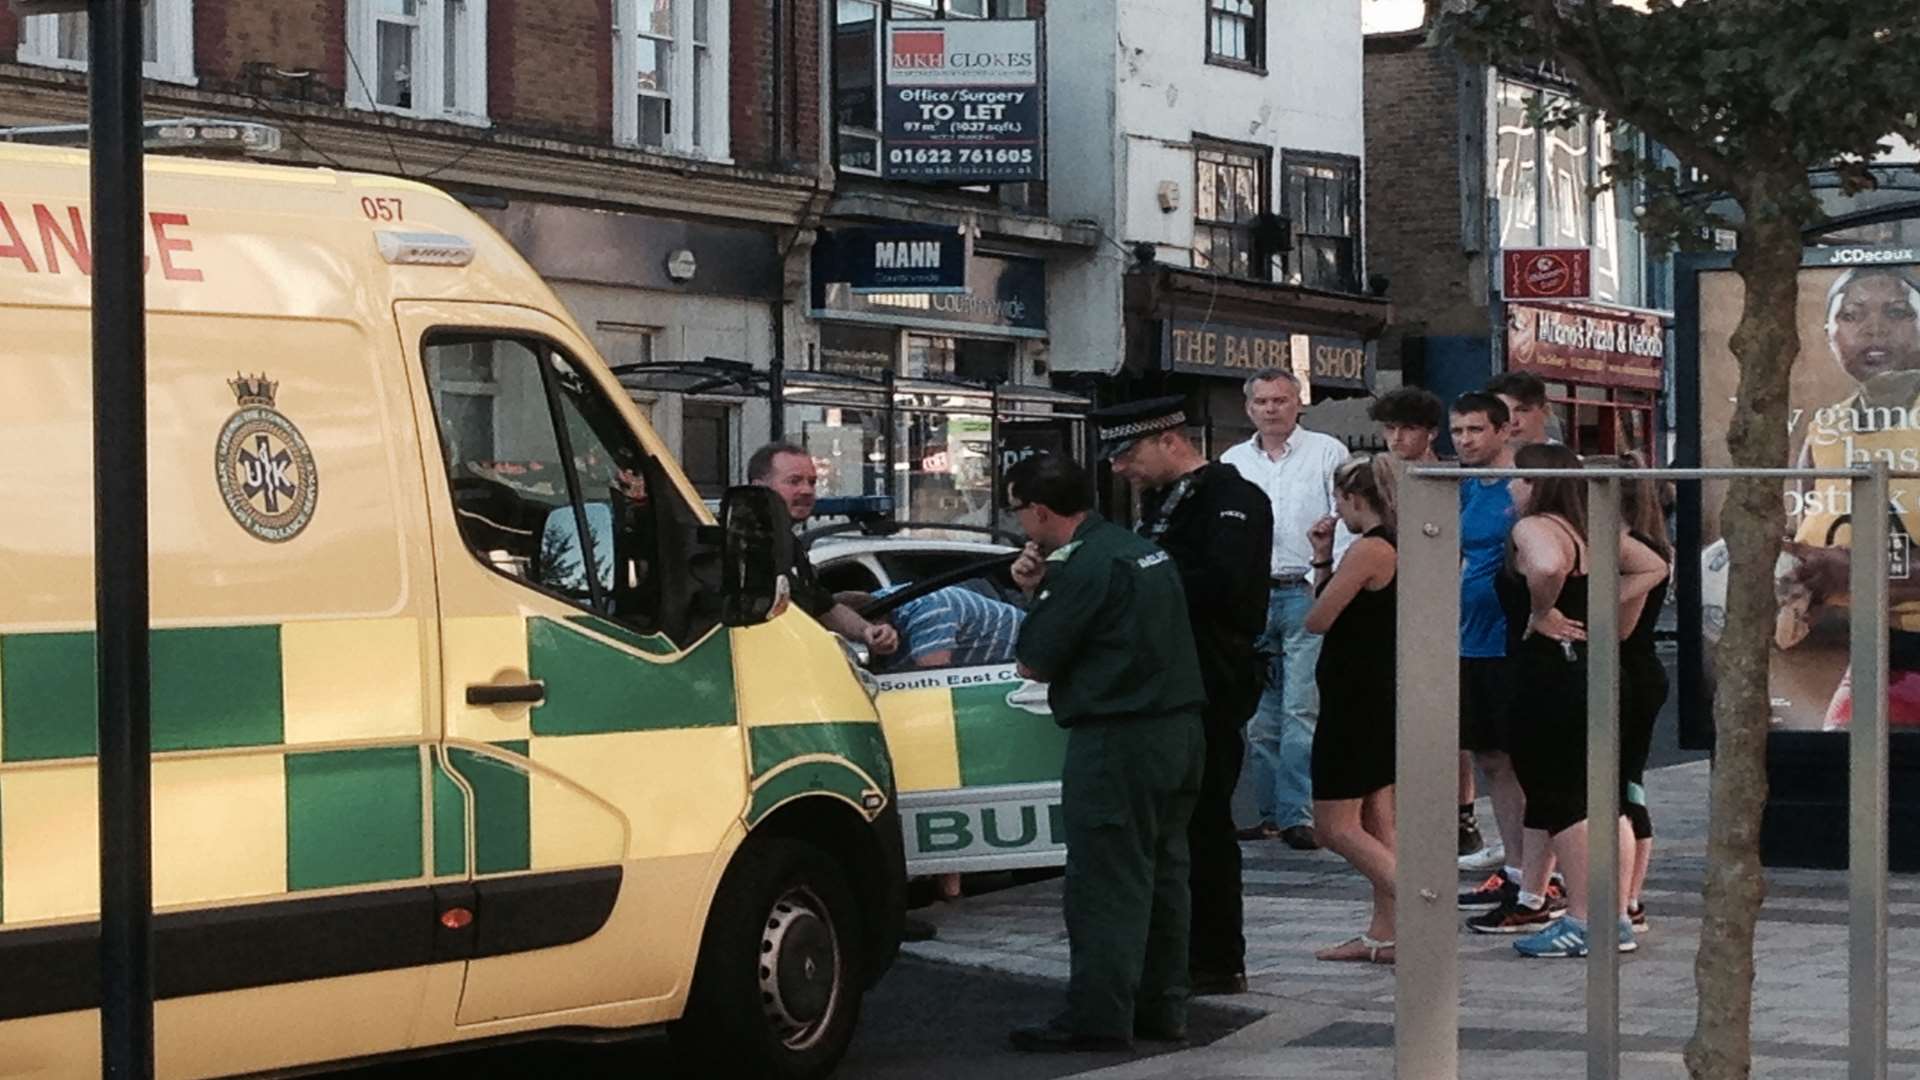 Ambulance staff and police in Maidstone High Street